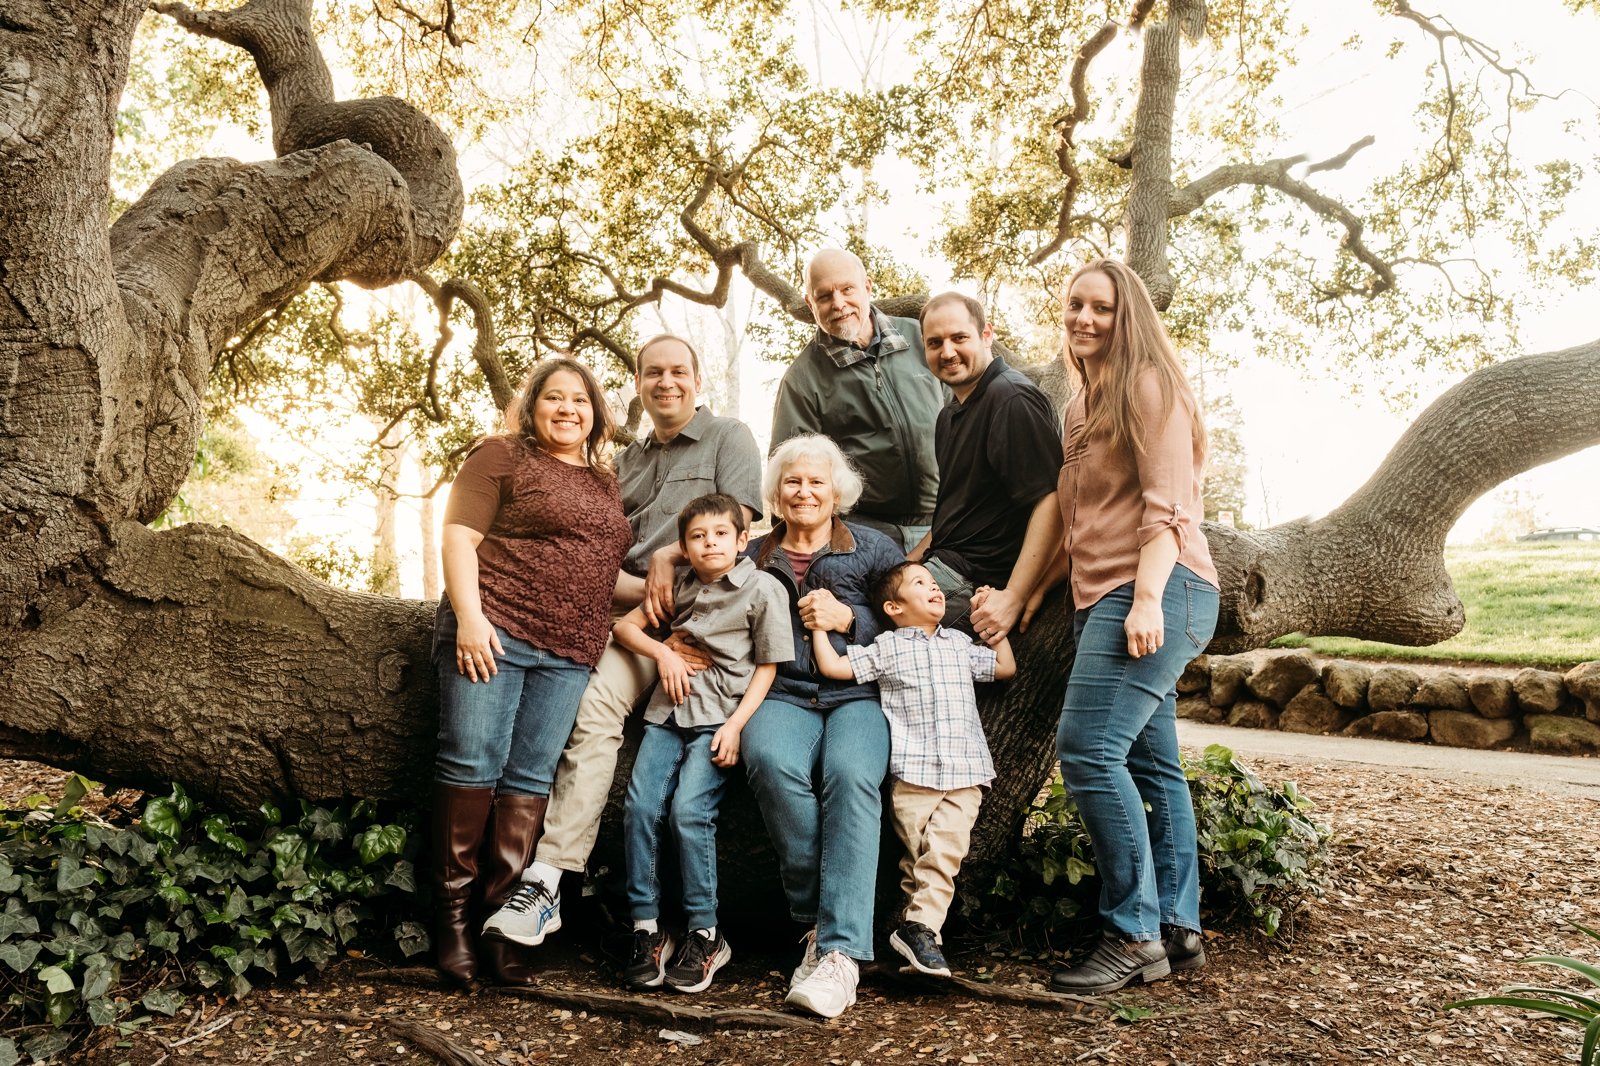 Piedmont Park Family Photographer Oakland East Bay Photoshoot Young Soul Photography 38.jpg